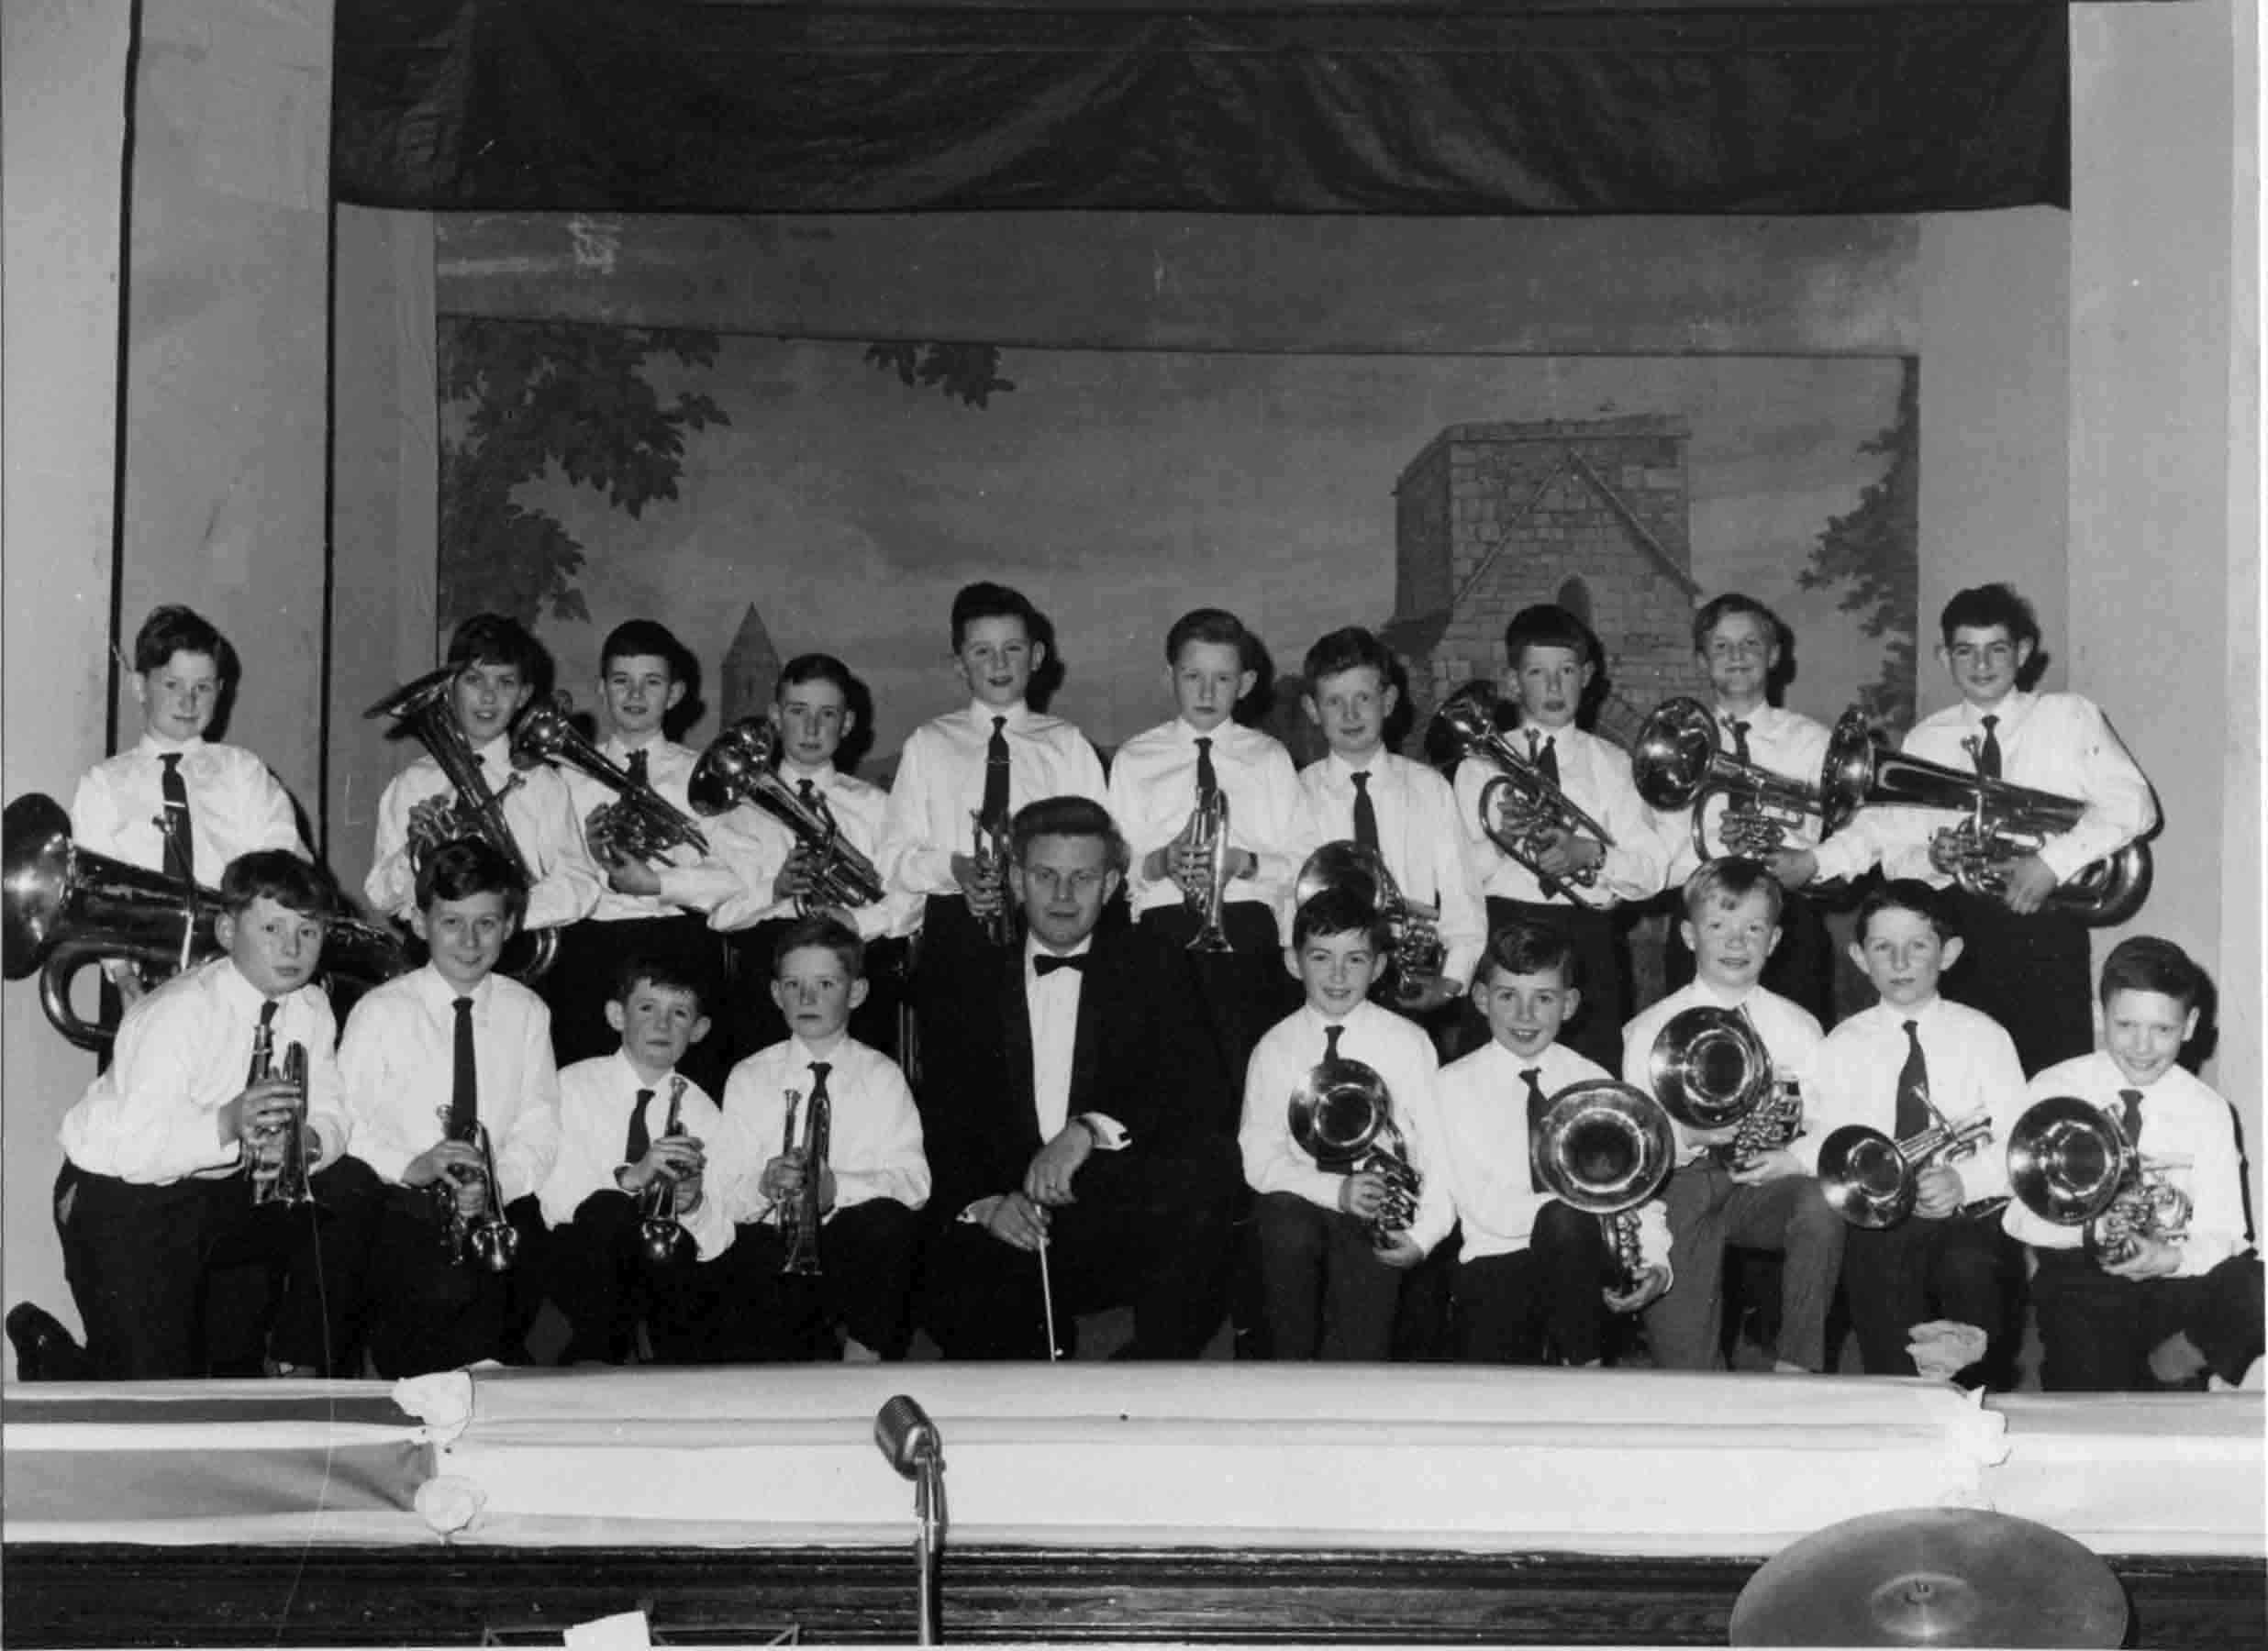 The debut performance of the Carndonagh Boys' Brass Band, the Colgan Hall, St. Patrick's Night Concert, 1967